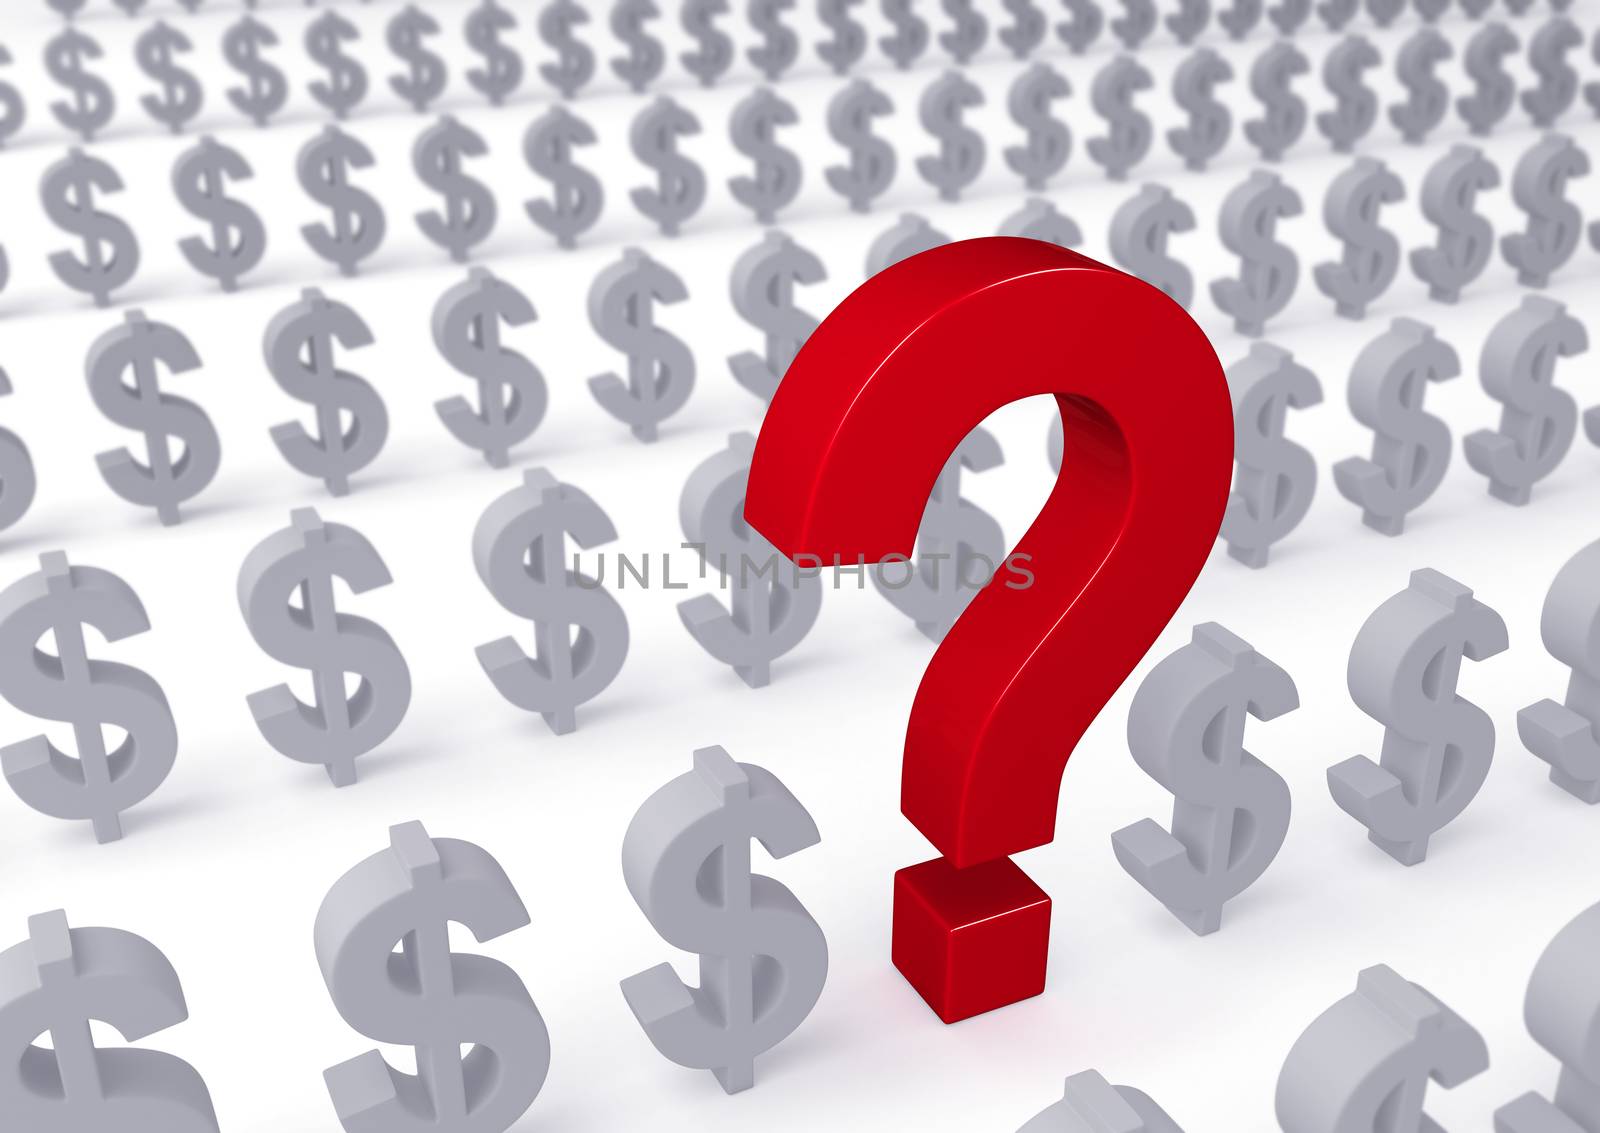 A large, red question mark stands out in a field of gray dollar signs on white background. Shallow DOF with focus on the question mark.